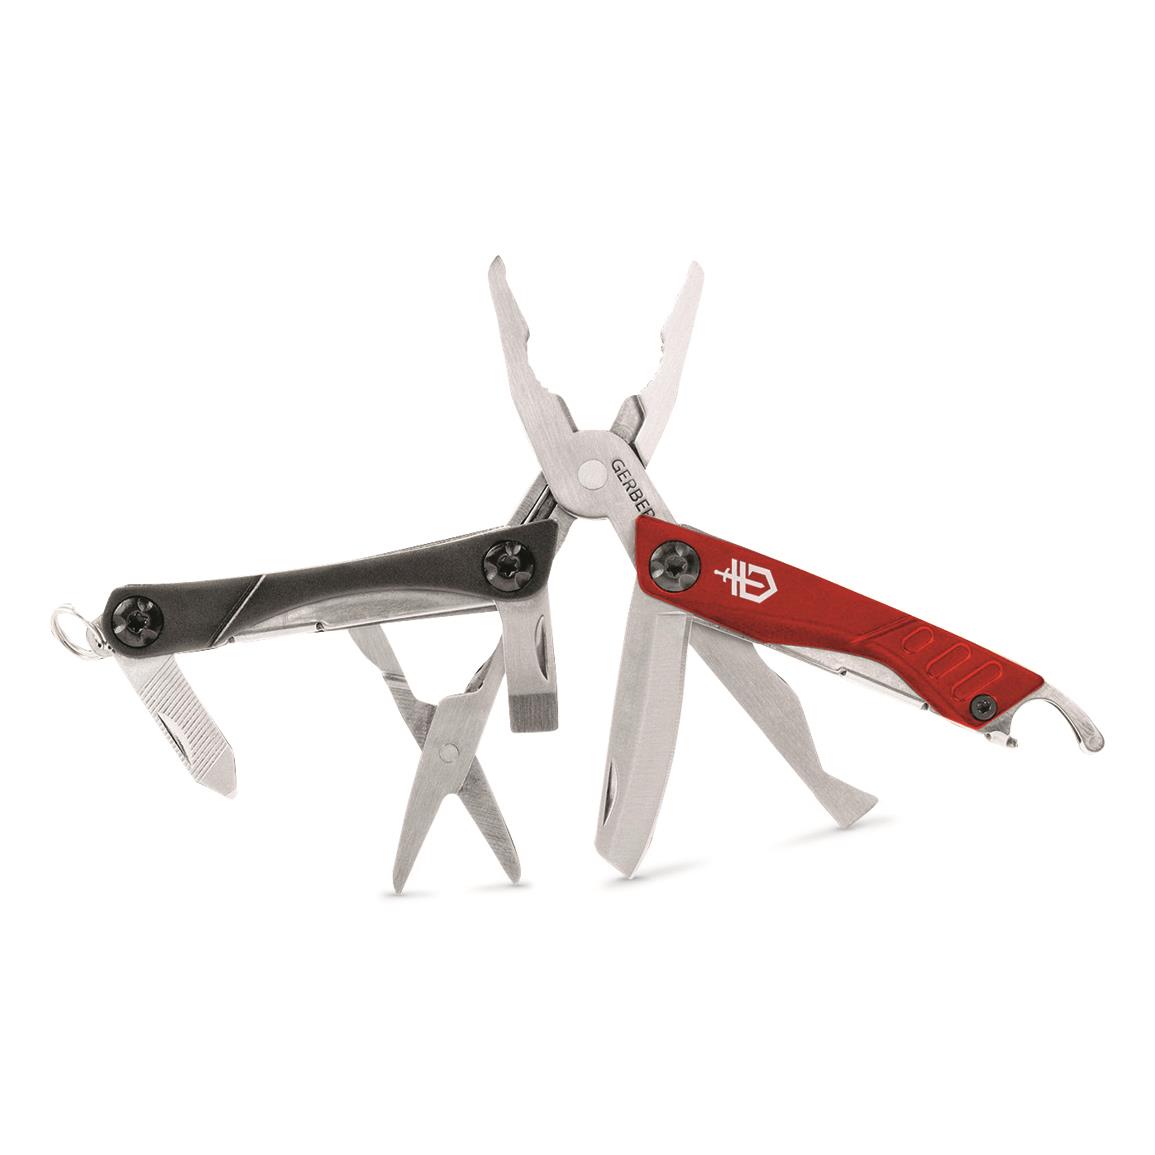 Spring loaded needle nose pliers , Red